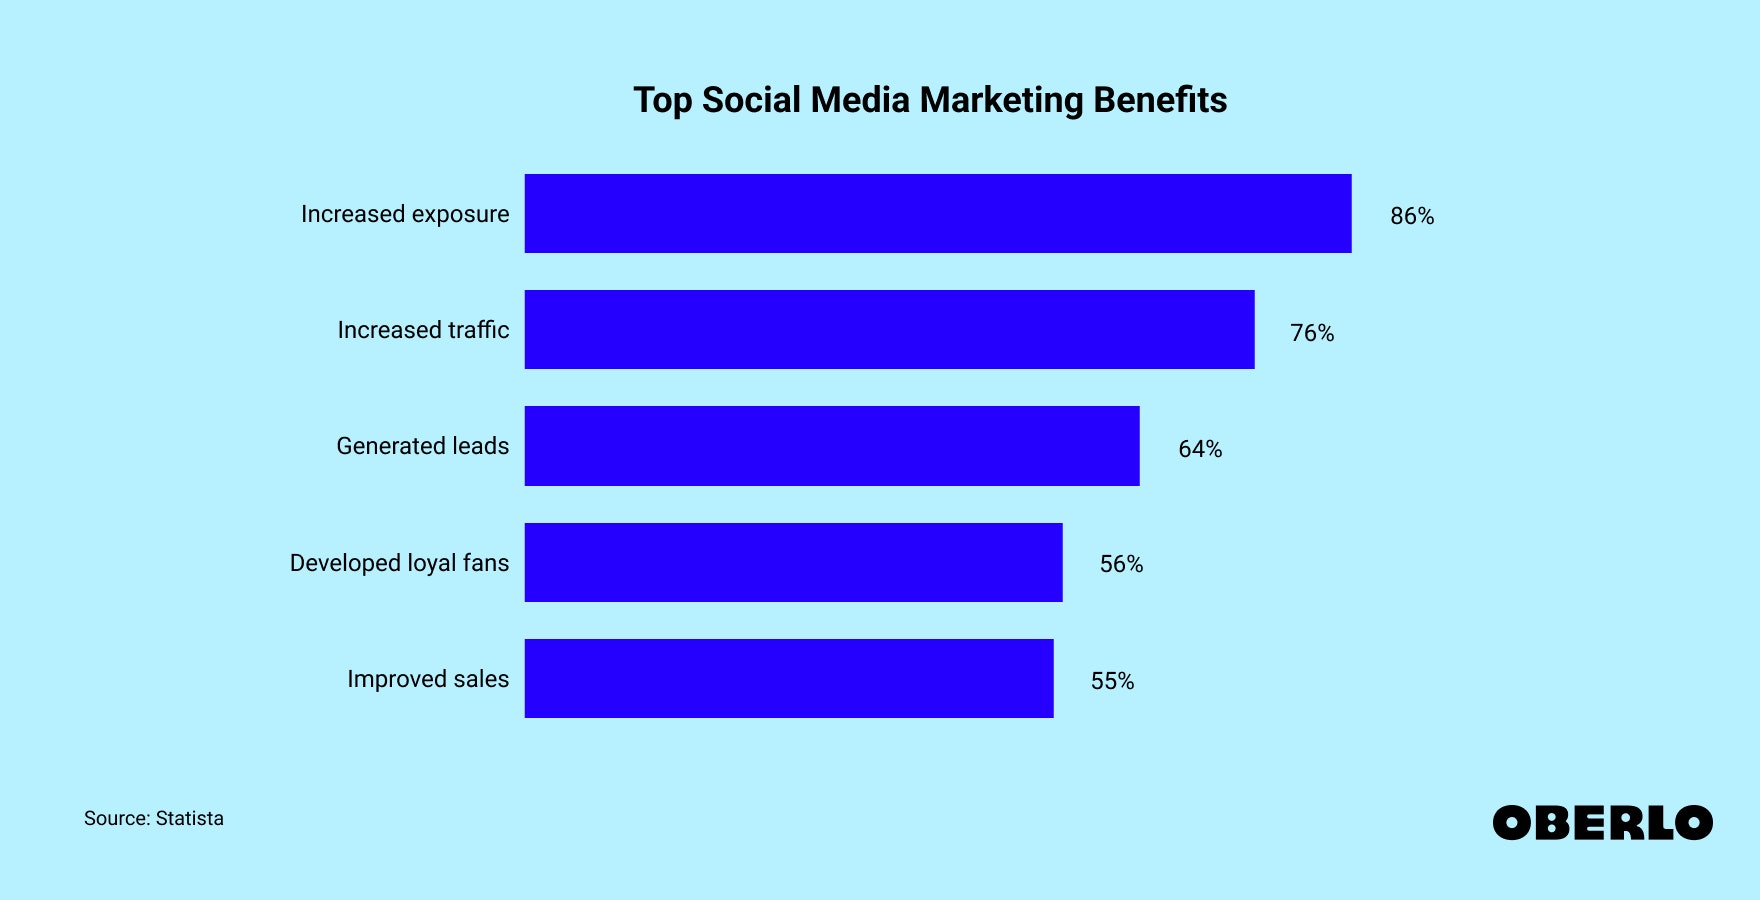 Chart showing: Top Benefits of Social Media Marketing